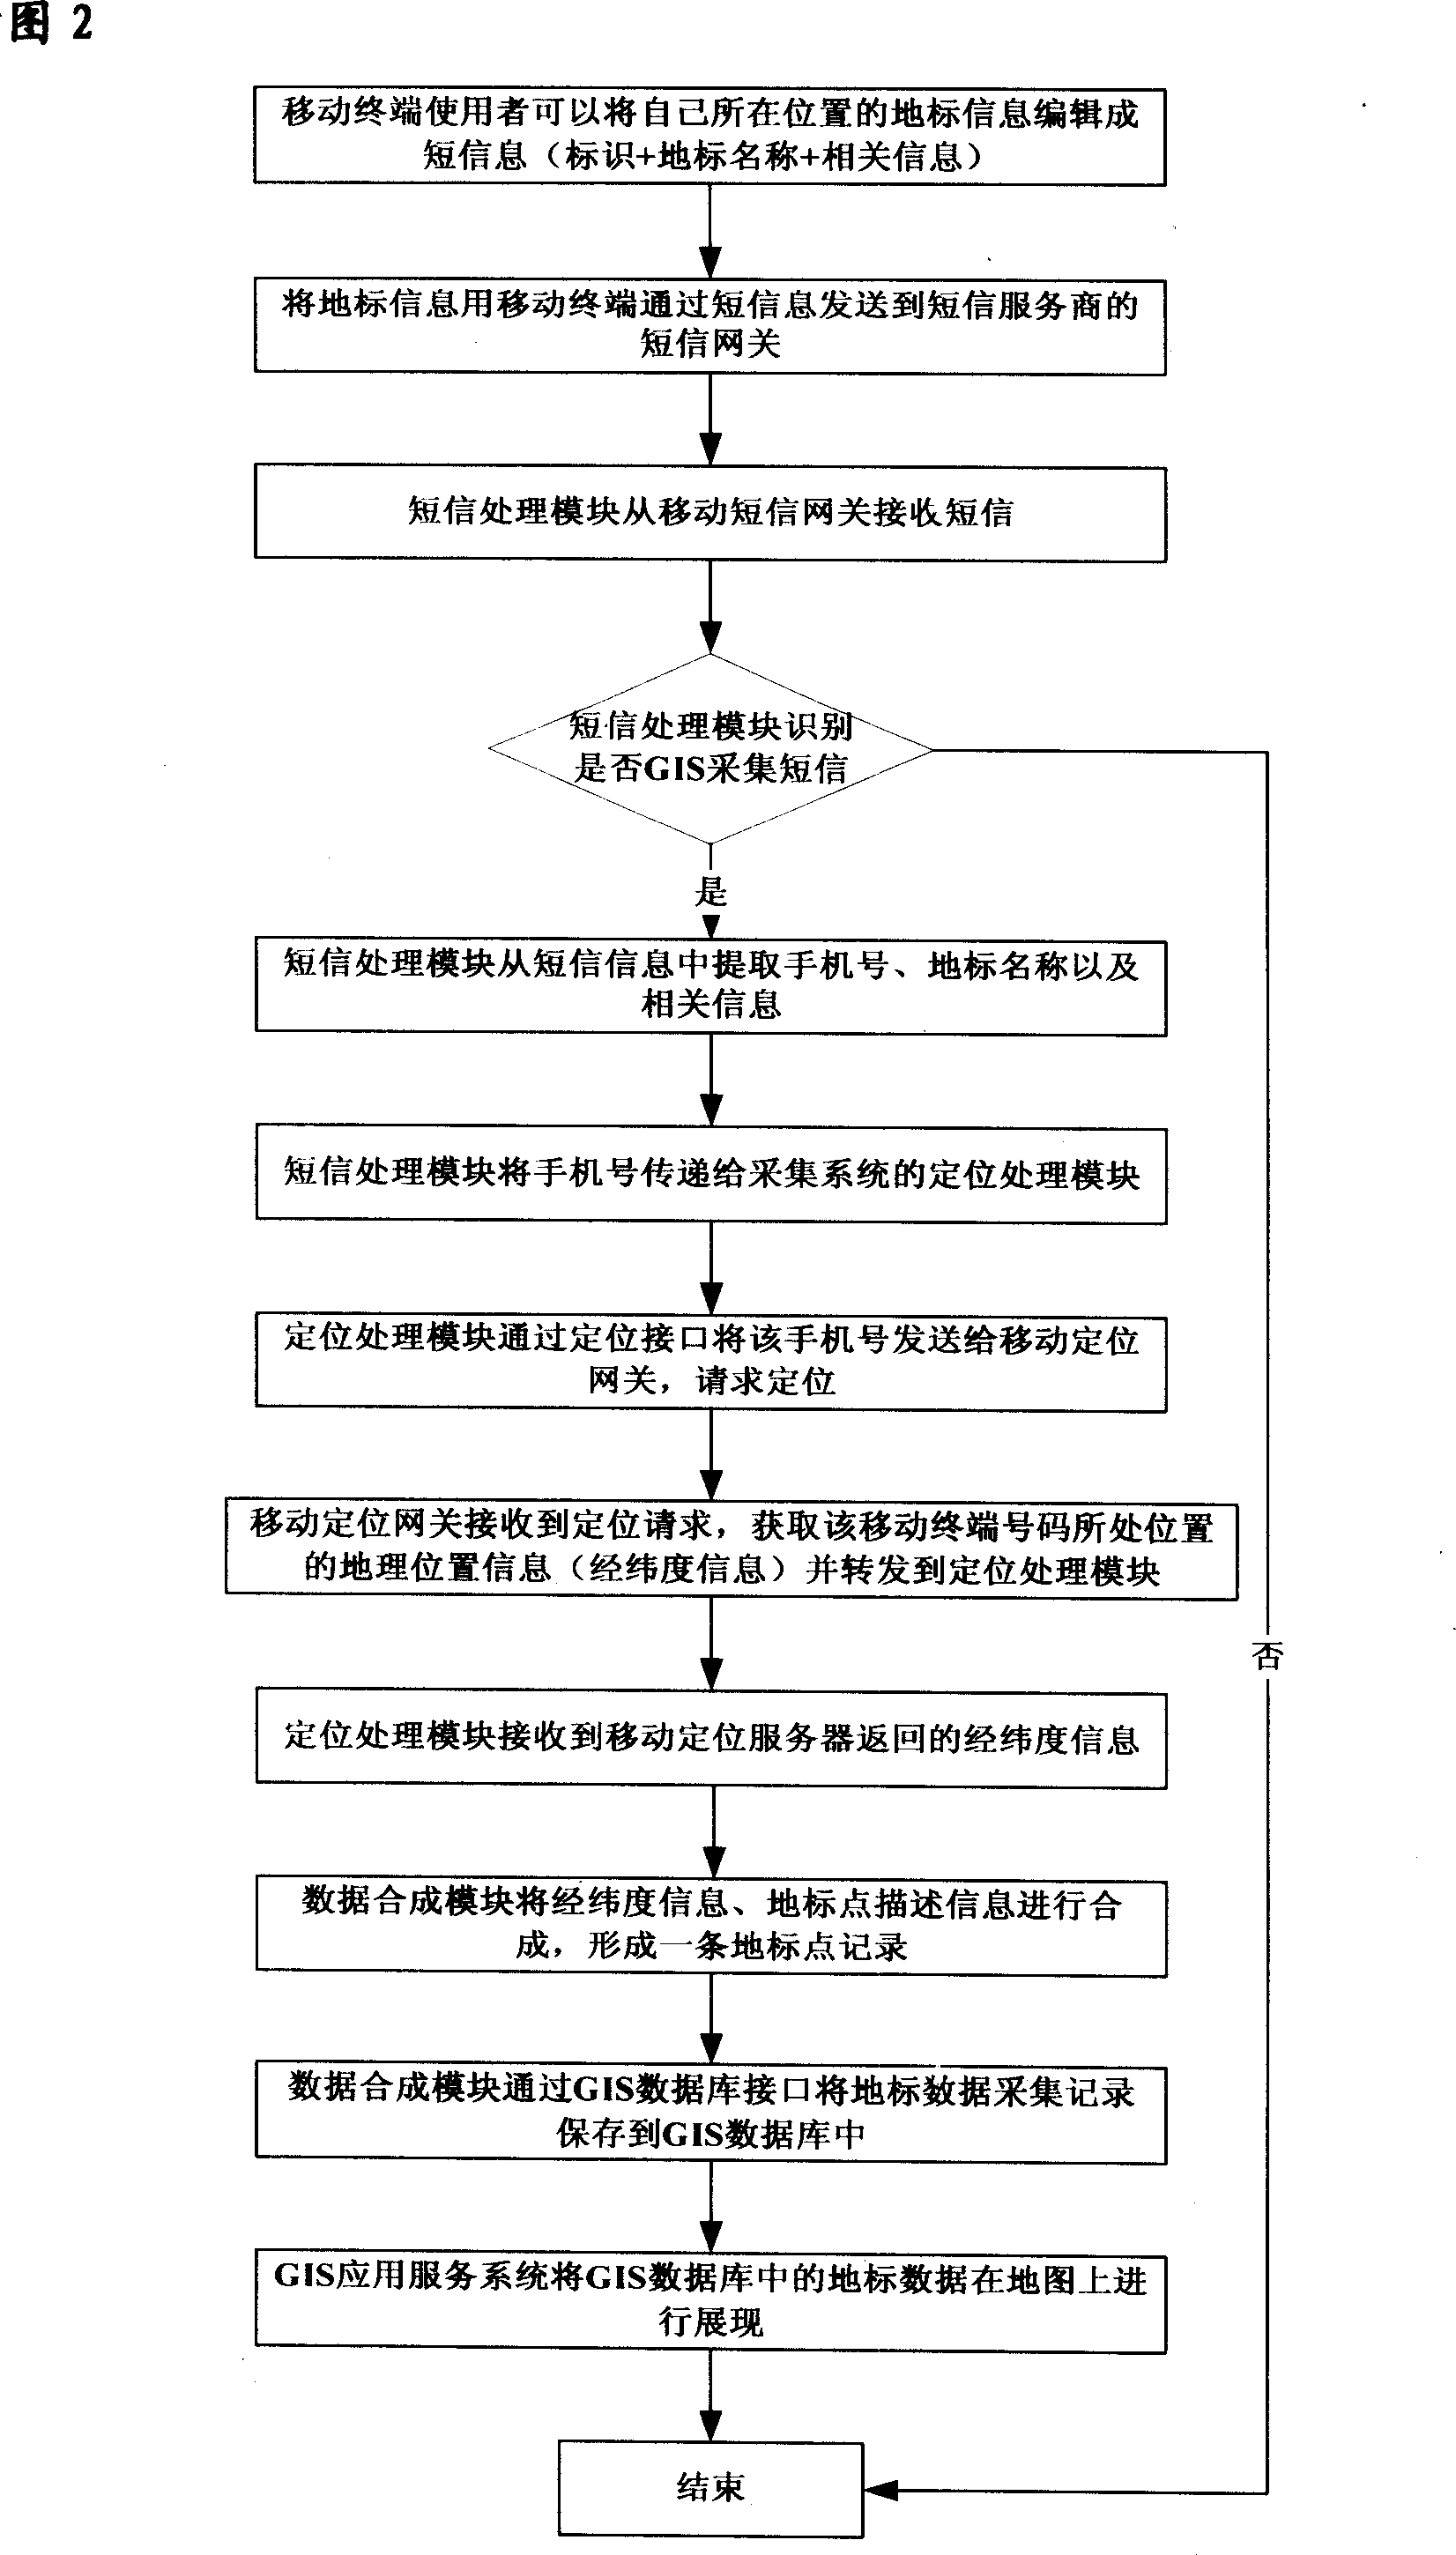 System and method for implementing landmark collection of geographic information system using mobile phone